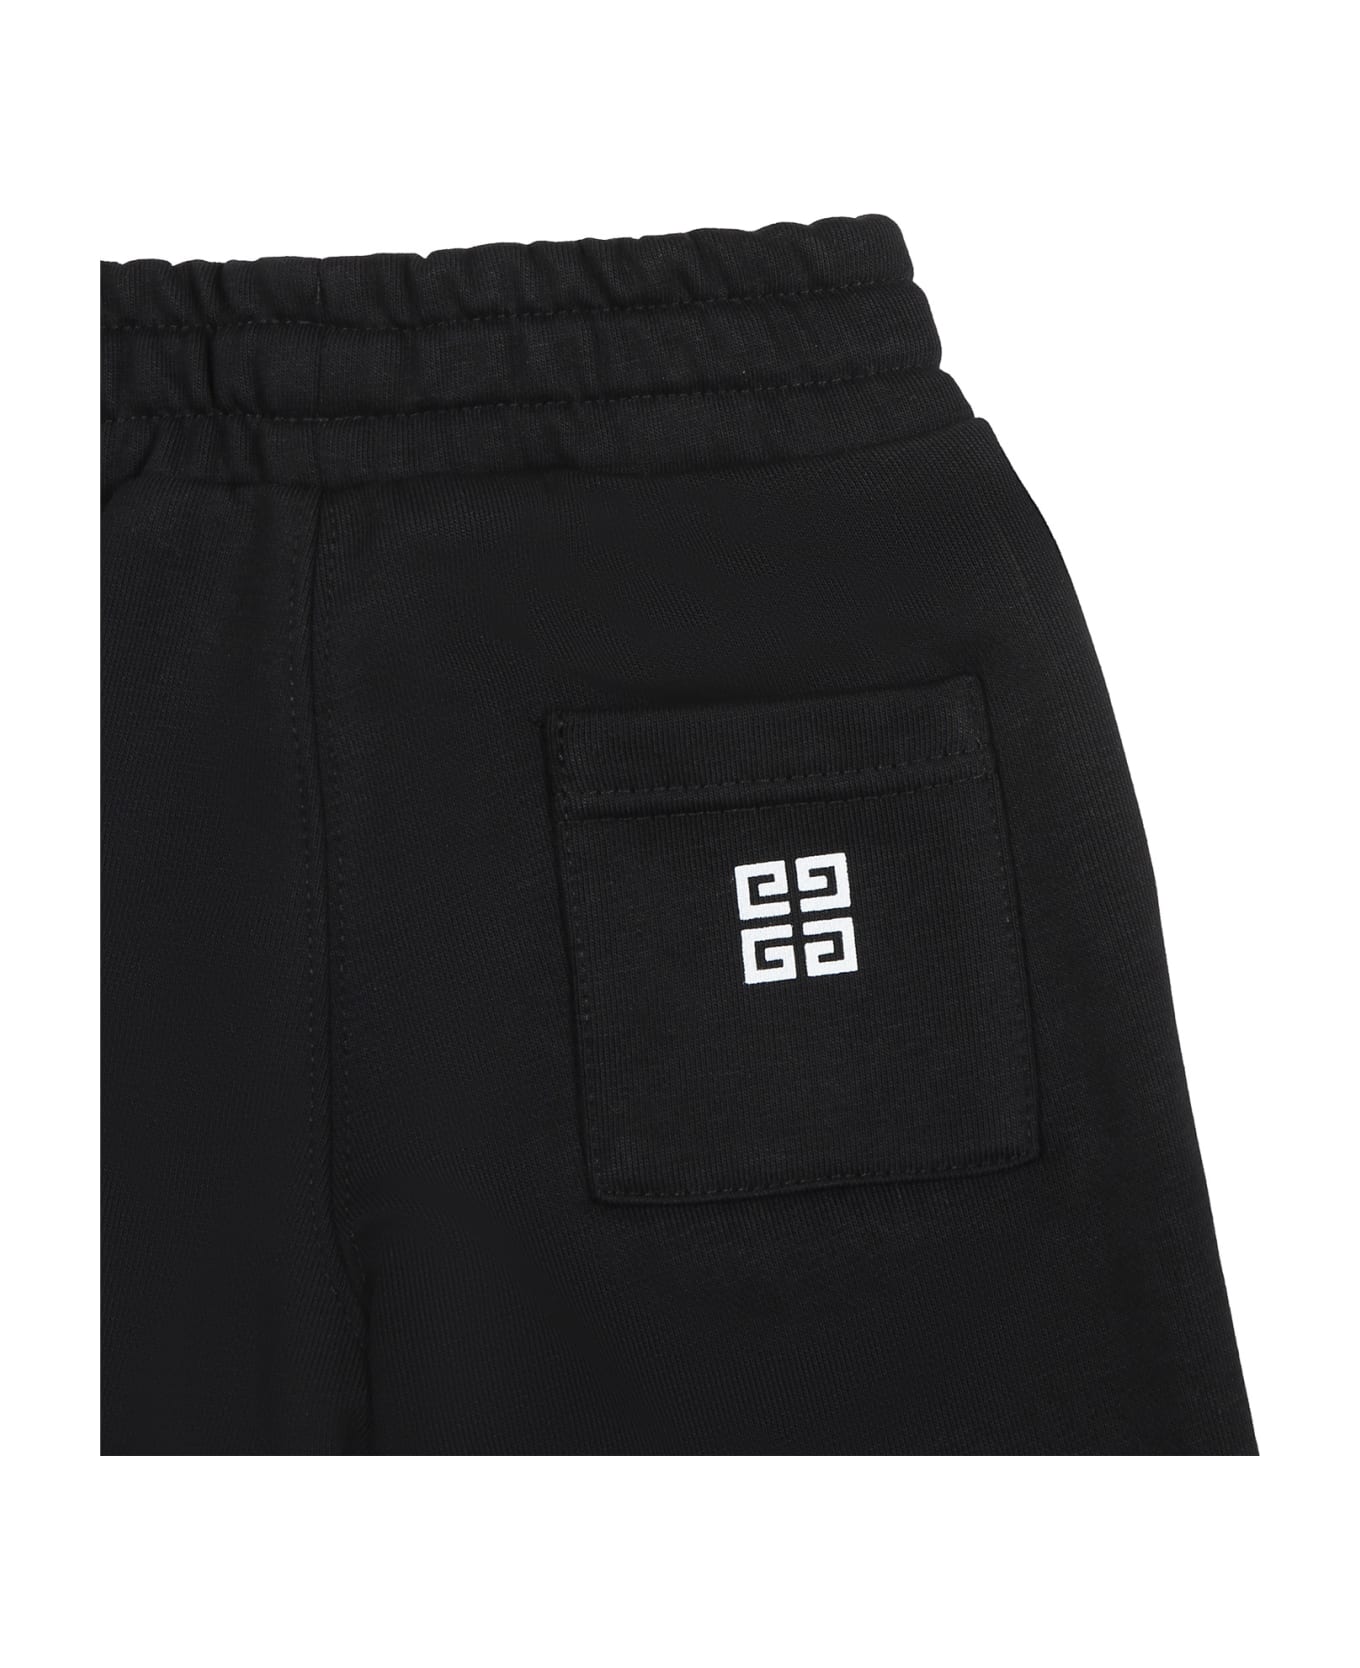 Givenchy Black Tracksuit Trousers Fpr Baby Boy With Logo - Black ボトムス